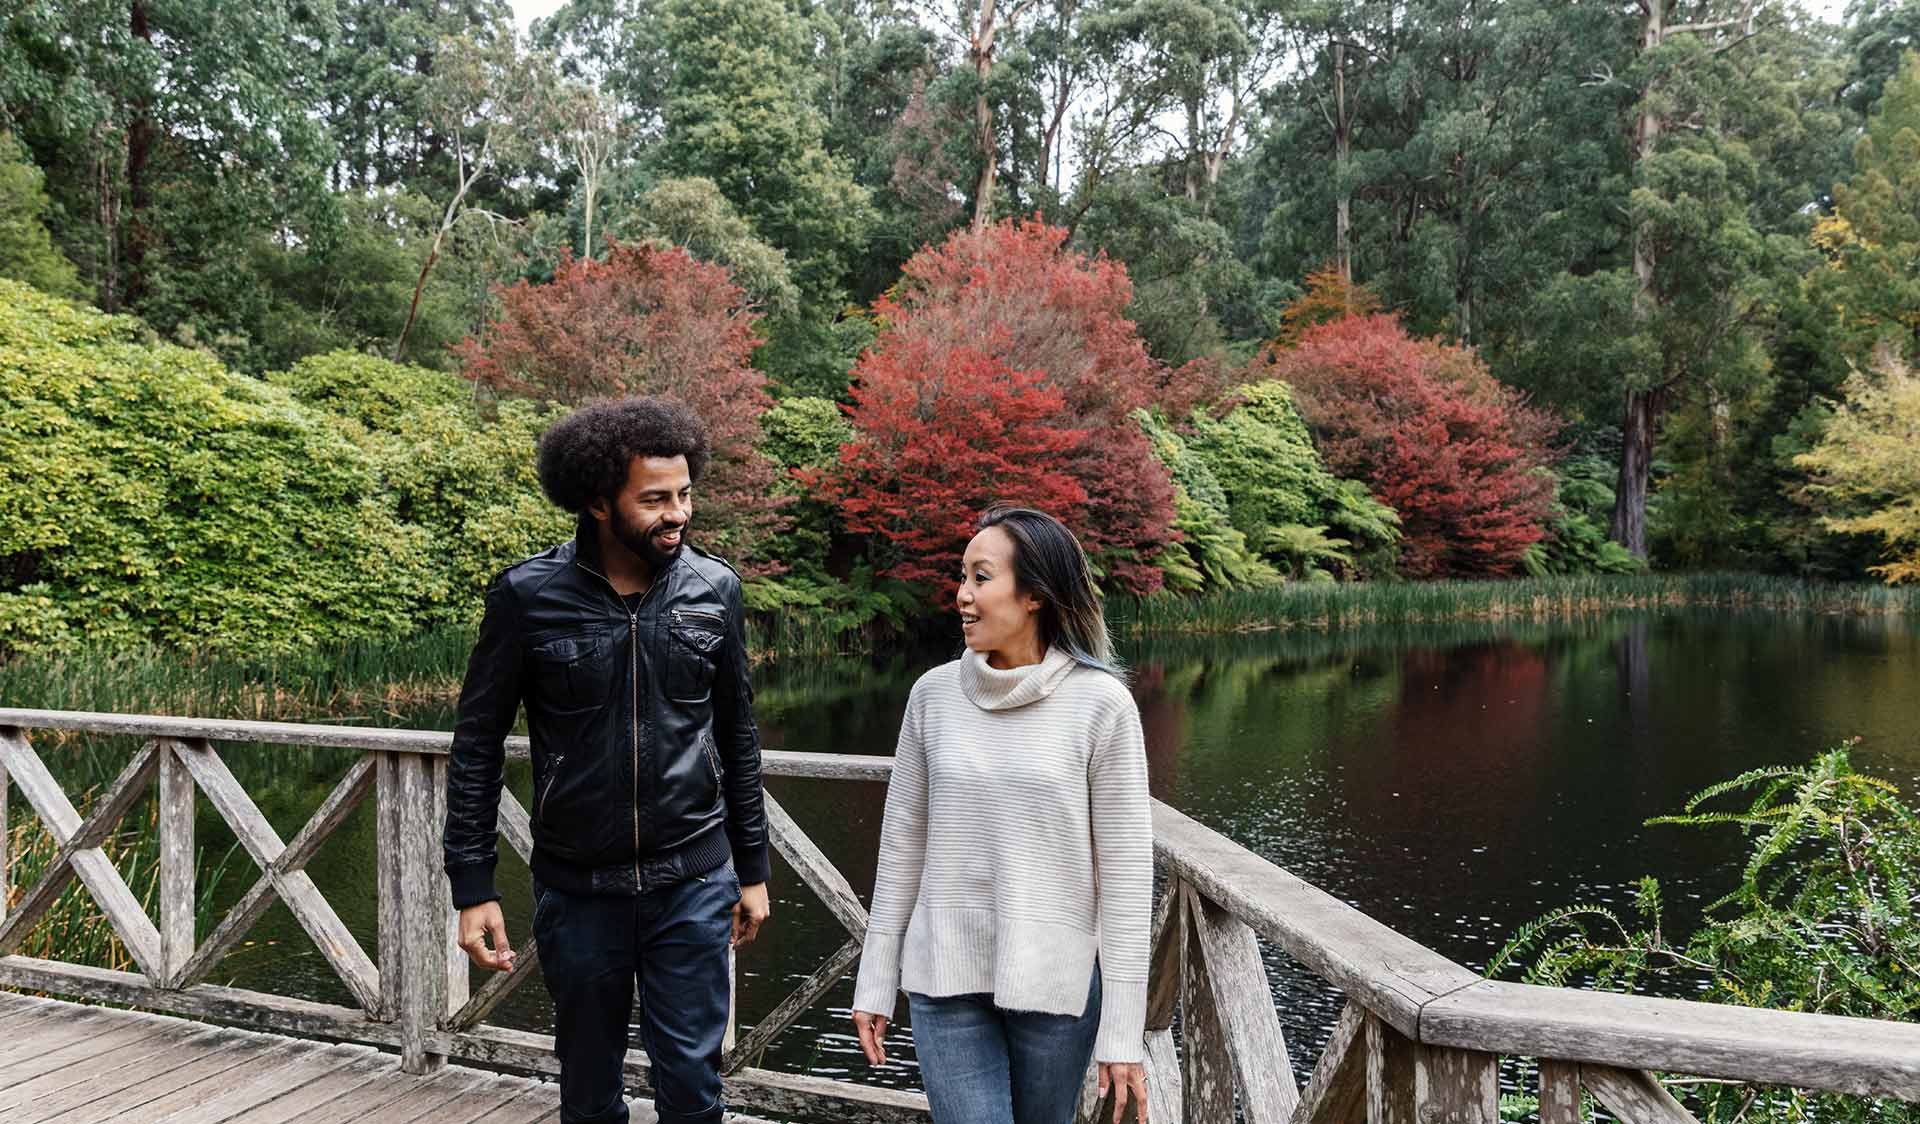 A man with an afro wearing a leather jacket and woman wearing a cream knitted jumper turn and walk away from a lake in the Dandenong Ranges Botanical Gardens.